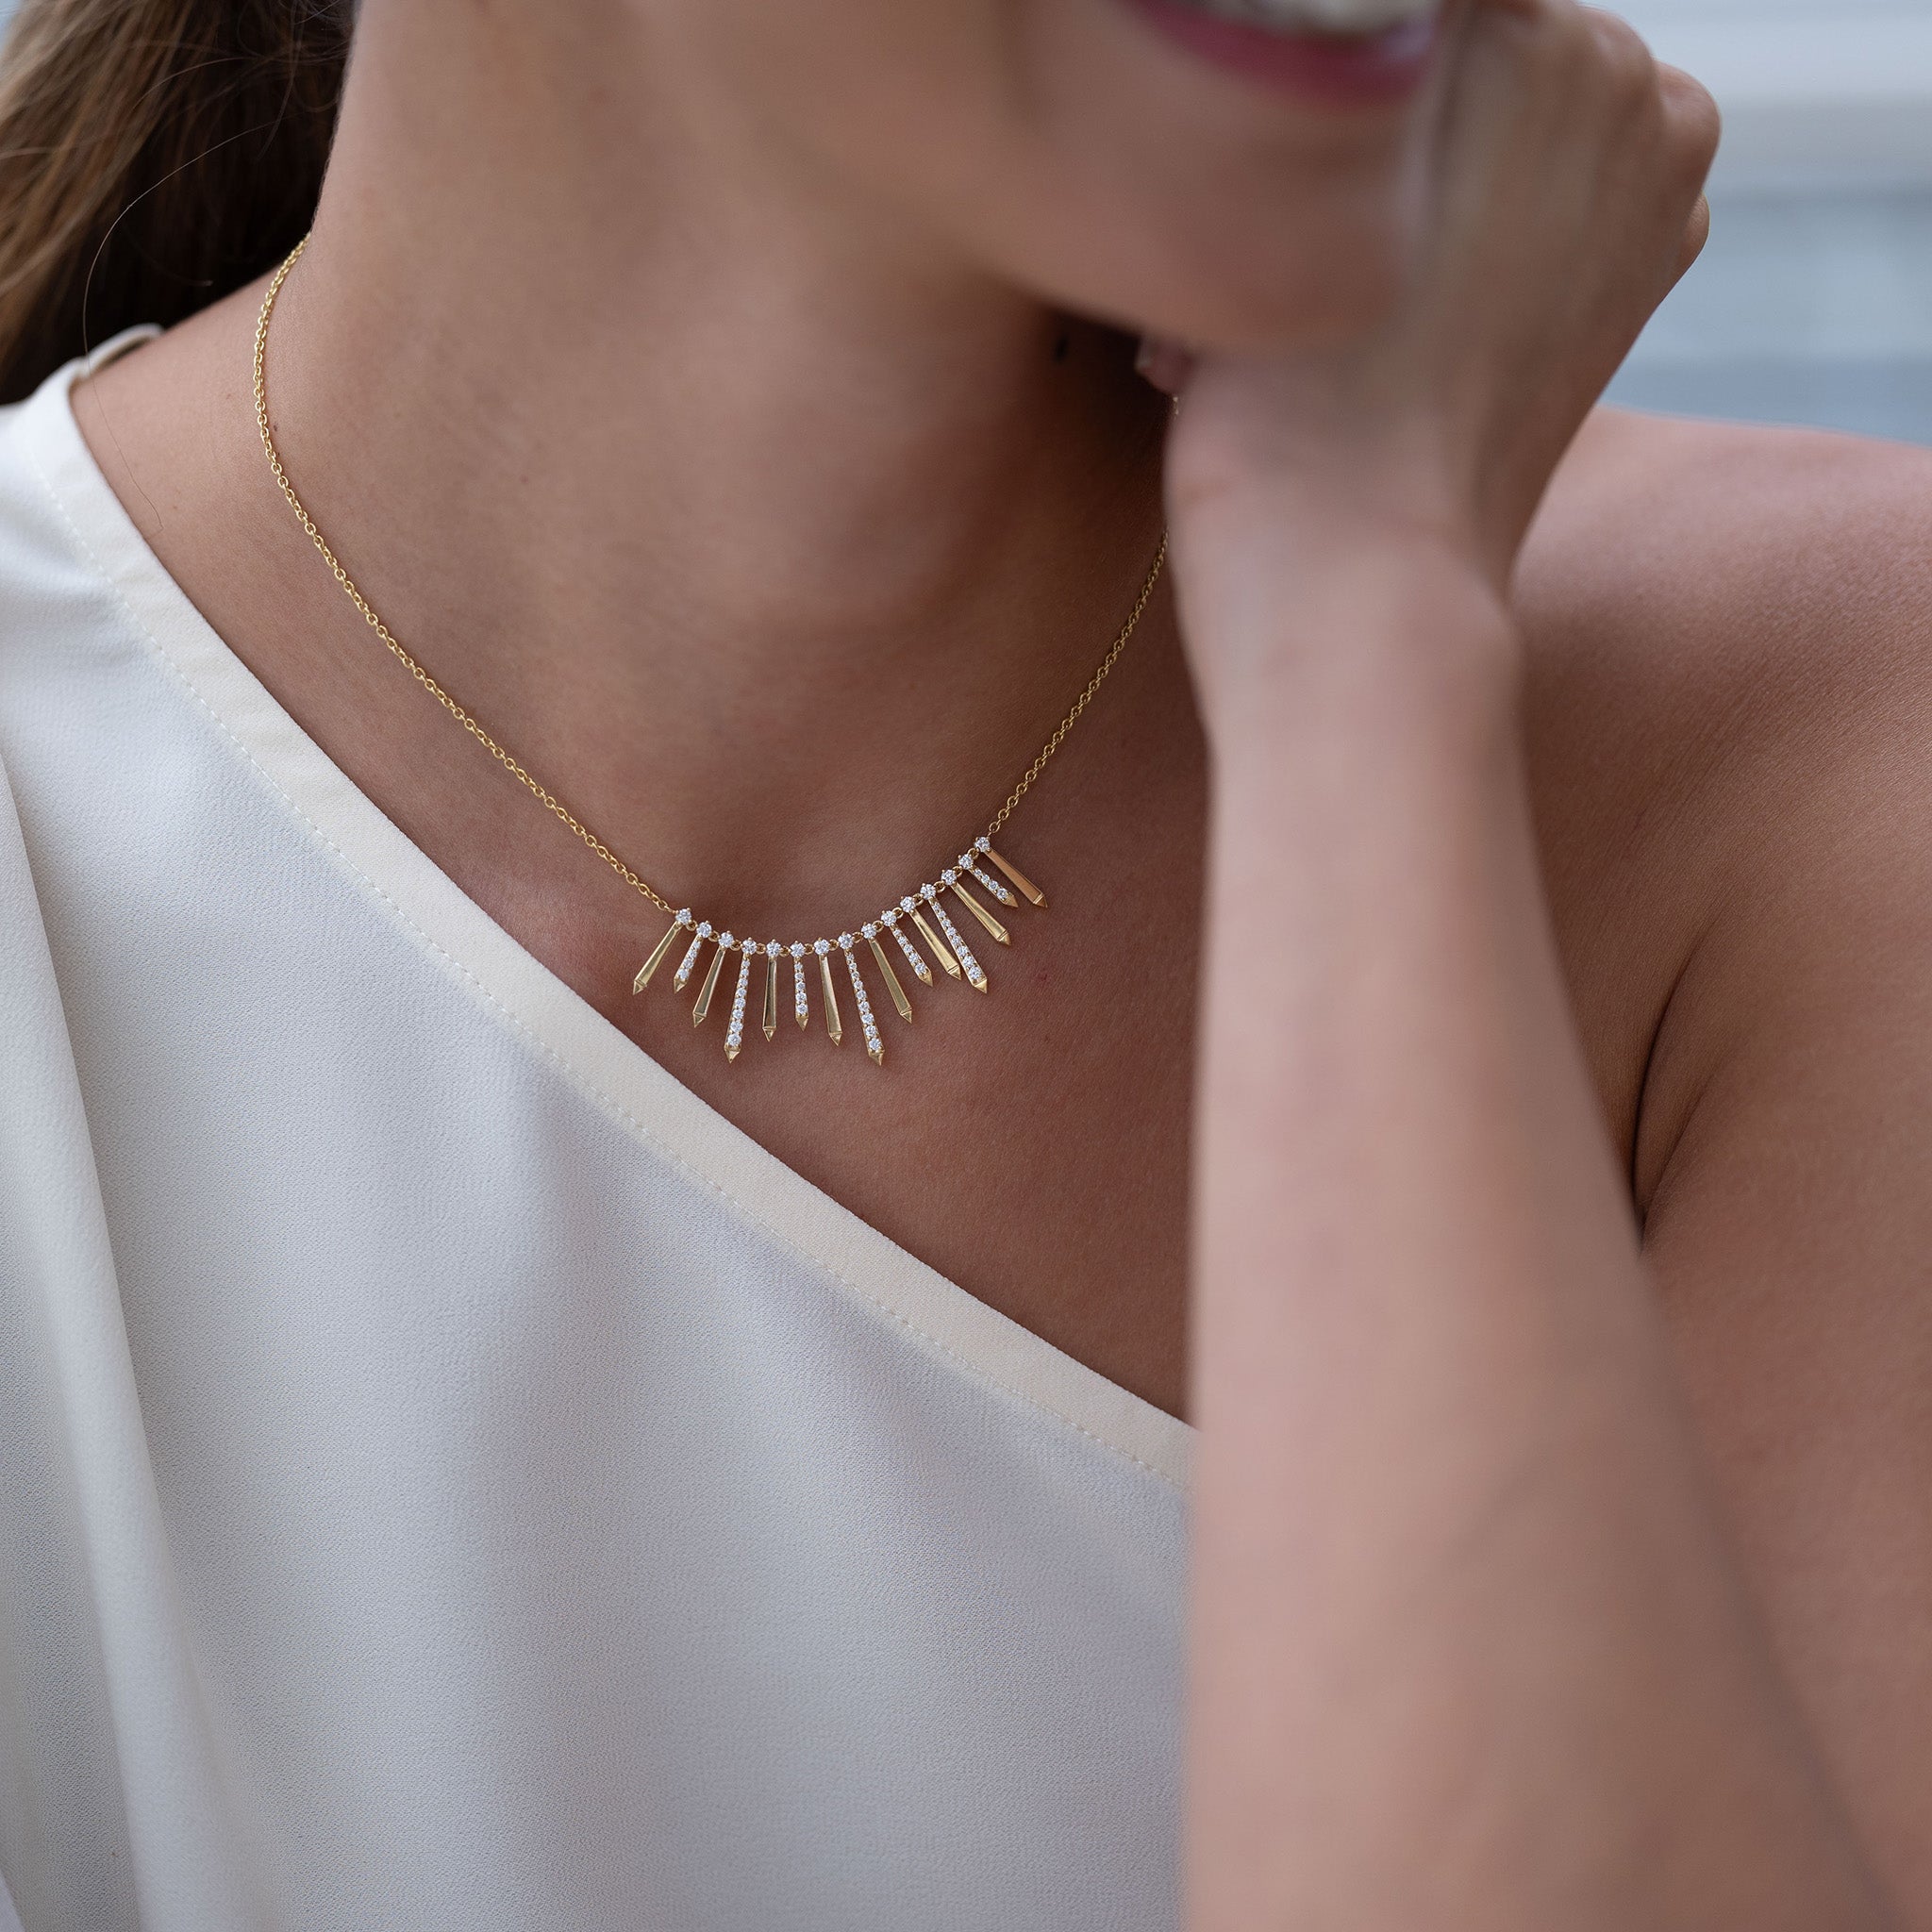 A radiant and sophisticated necklace crafted in gleaming yellow gold, adorned with dazzling diamonds, presented on model.